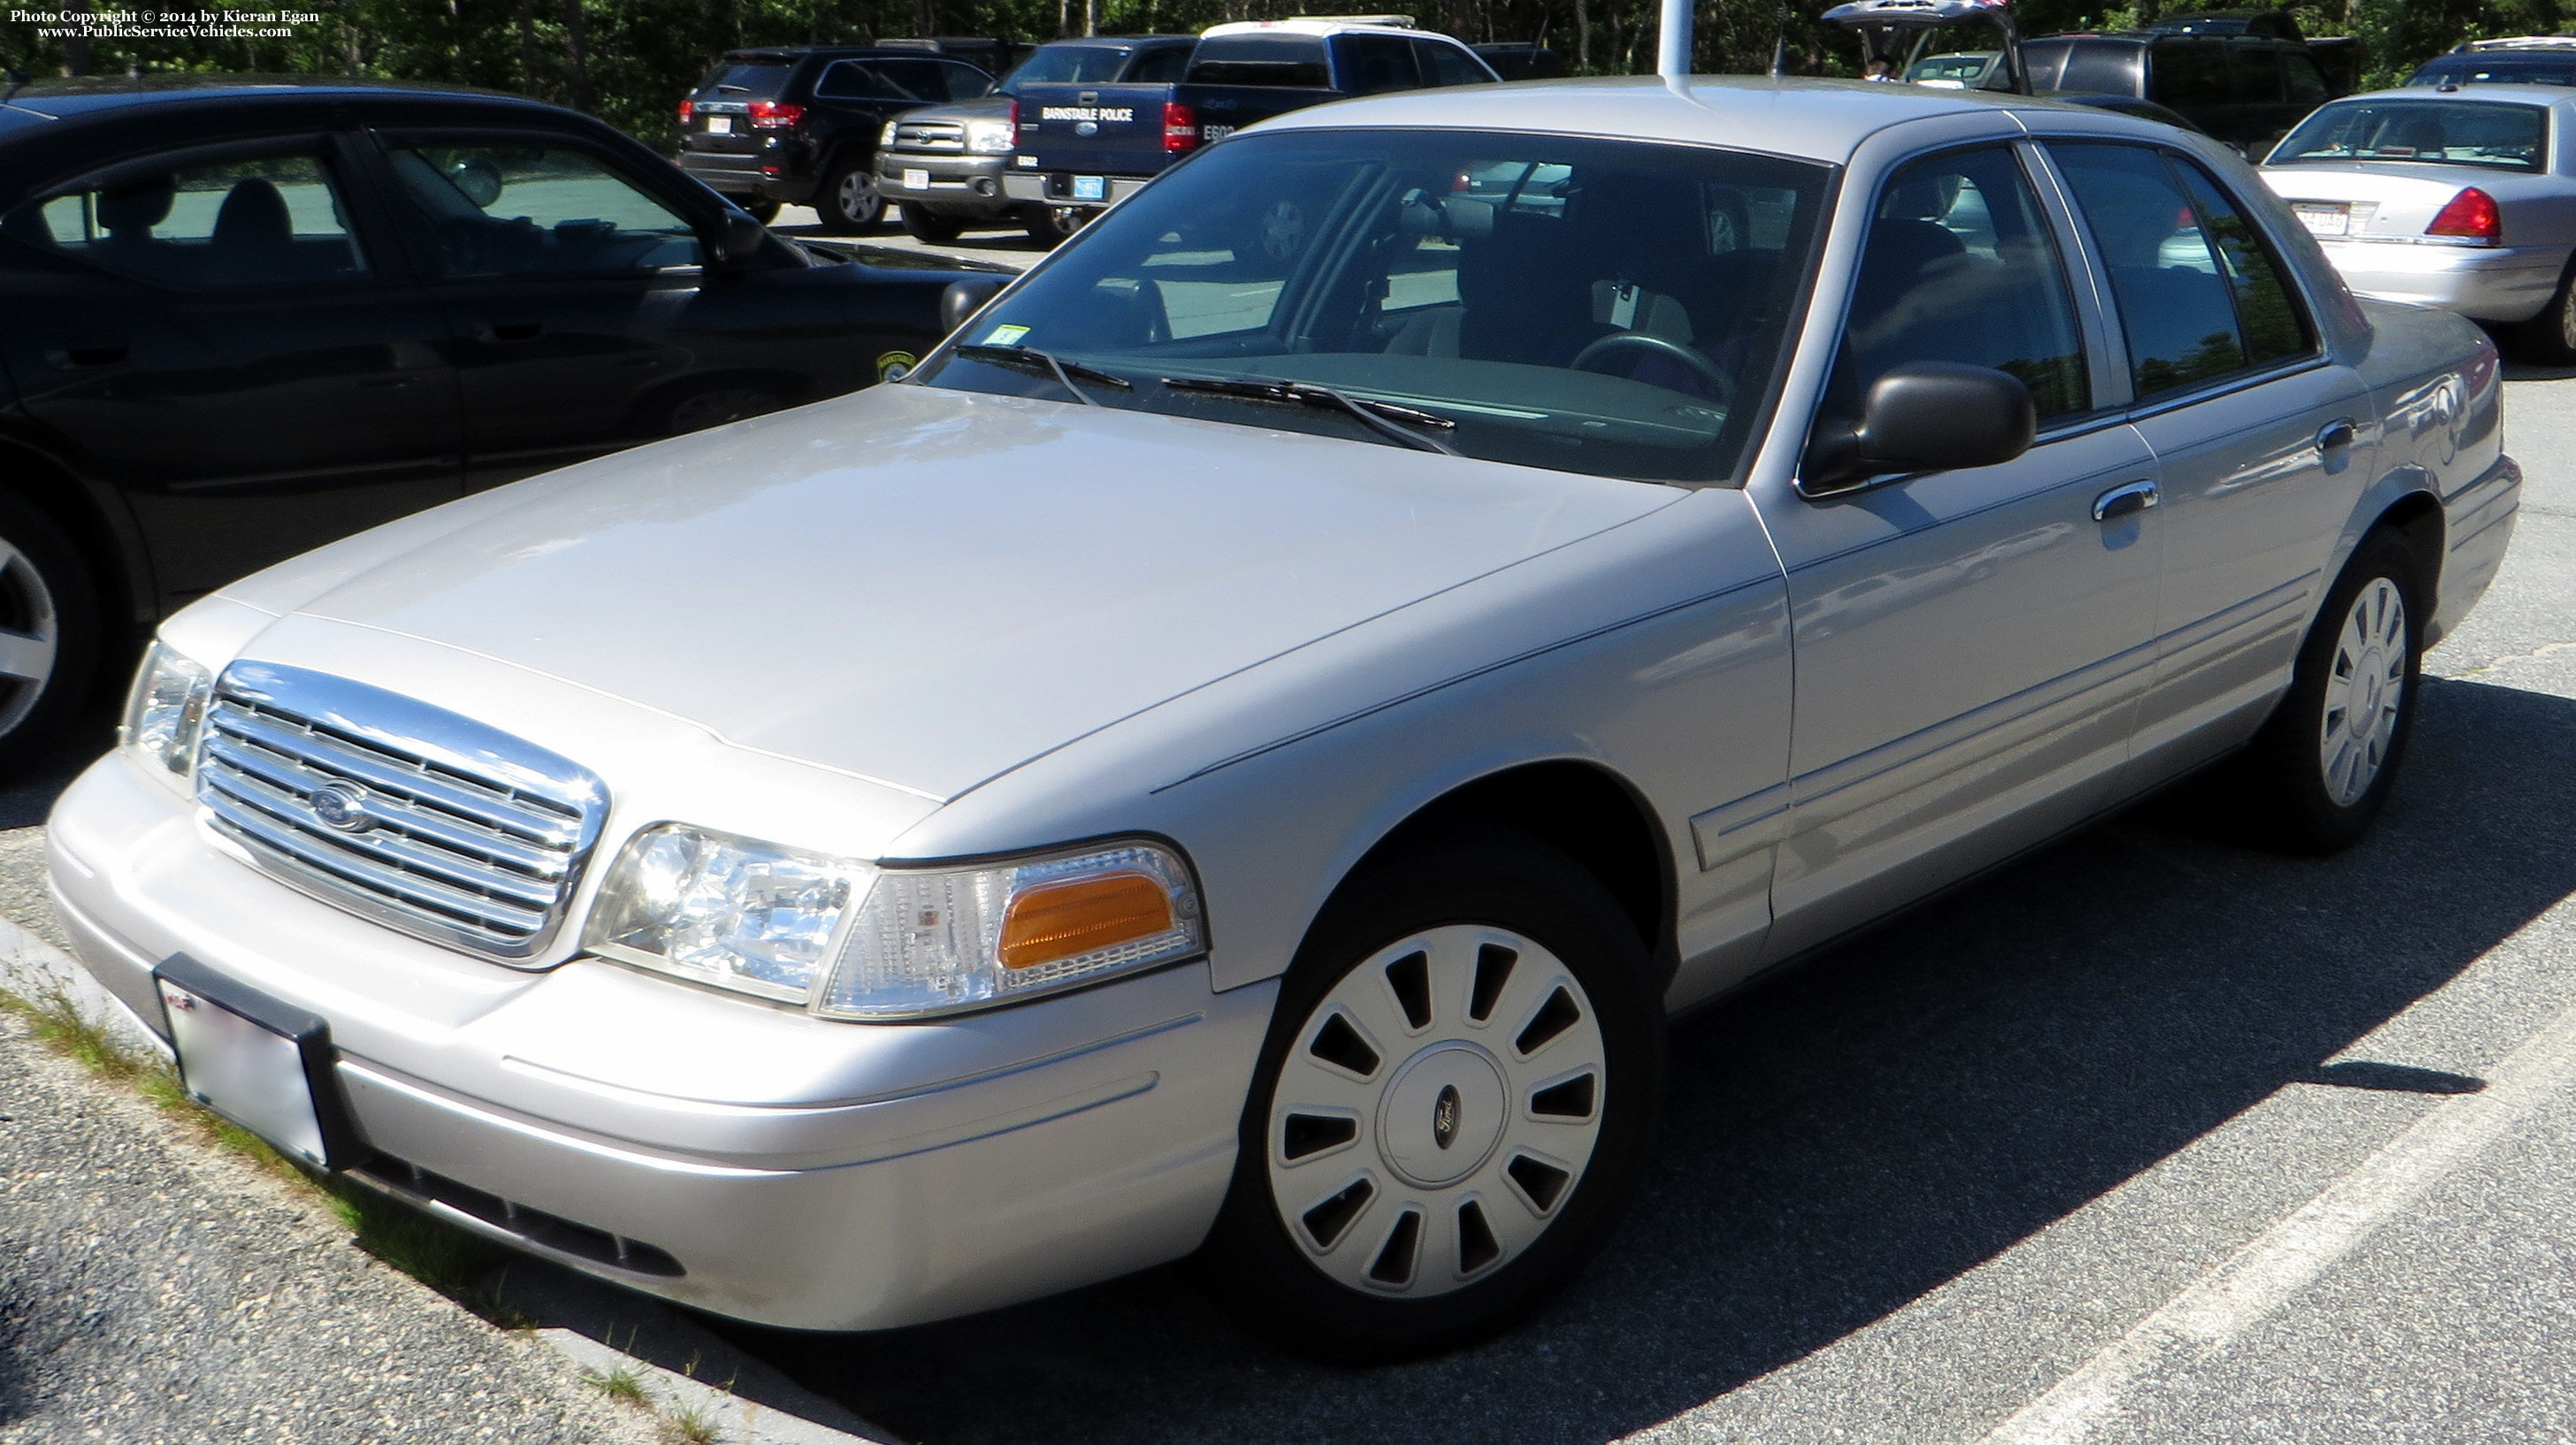 A photo  of Barnstable Police
            Unmarked Unit, a 2006-2011 Ford Crown Victoria             taken by Kieran Egan